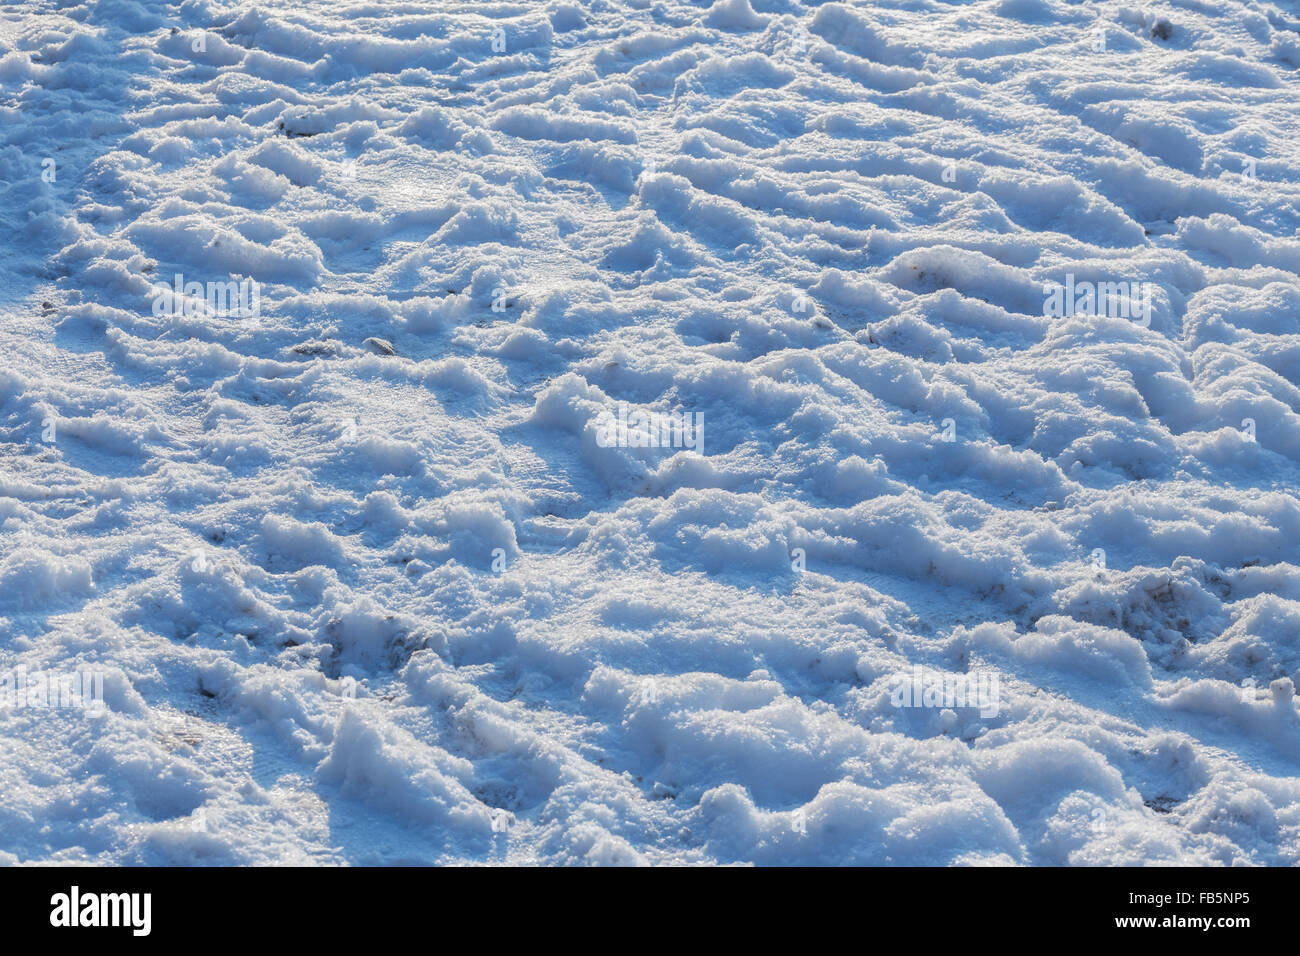 Footprints in the snow. Stock Photo